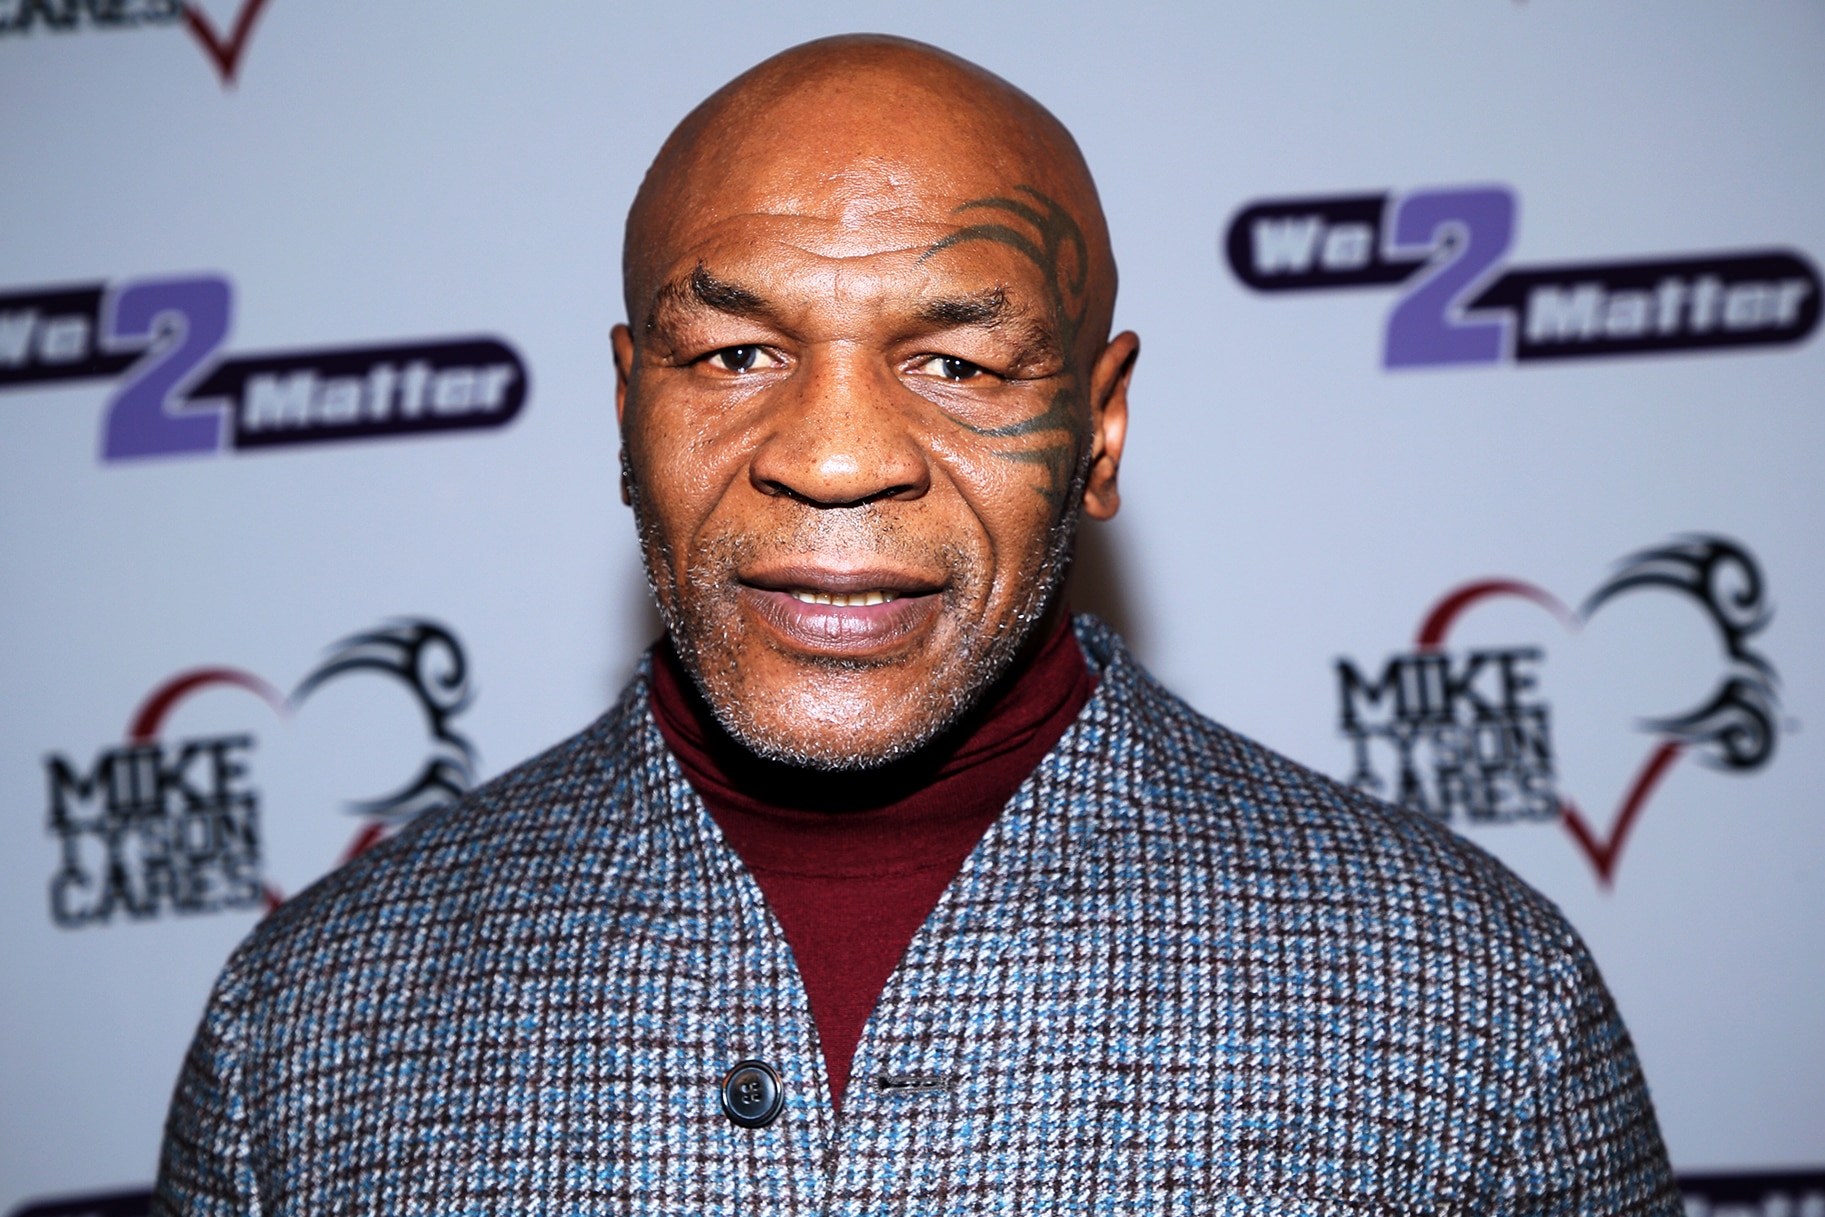 Mike Tyson attends the Mike Tyson Cares Fundraiser